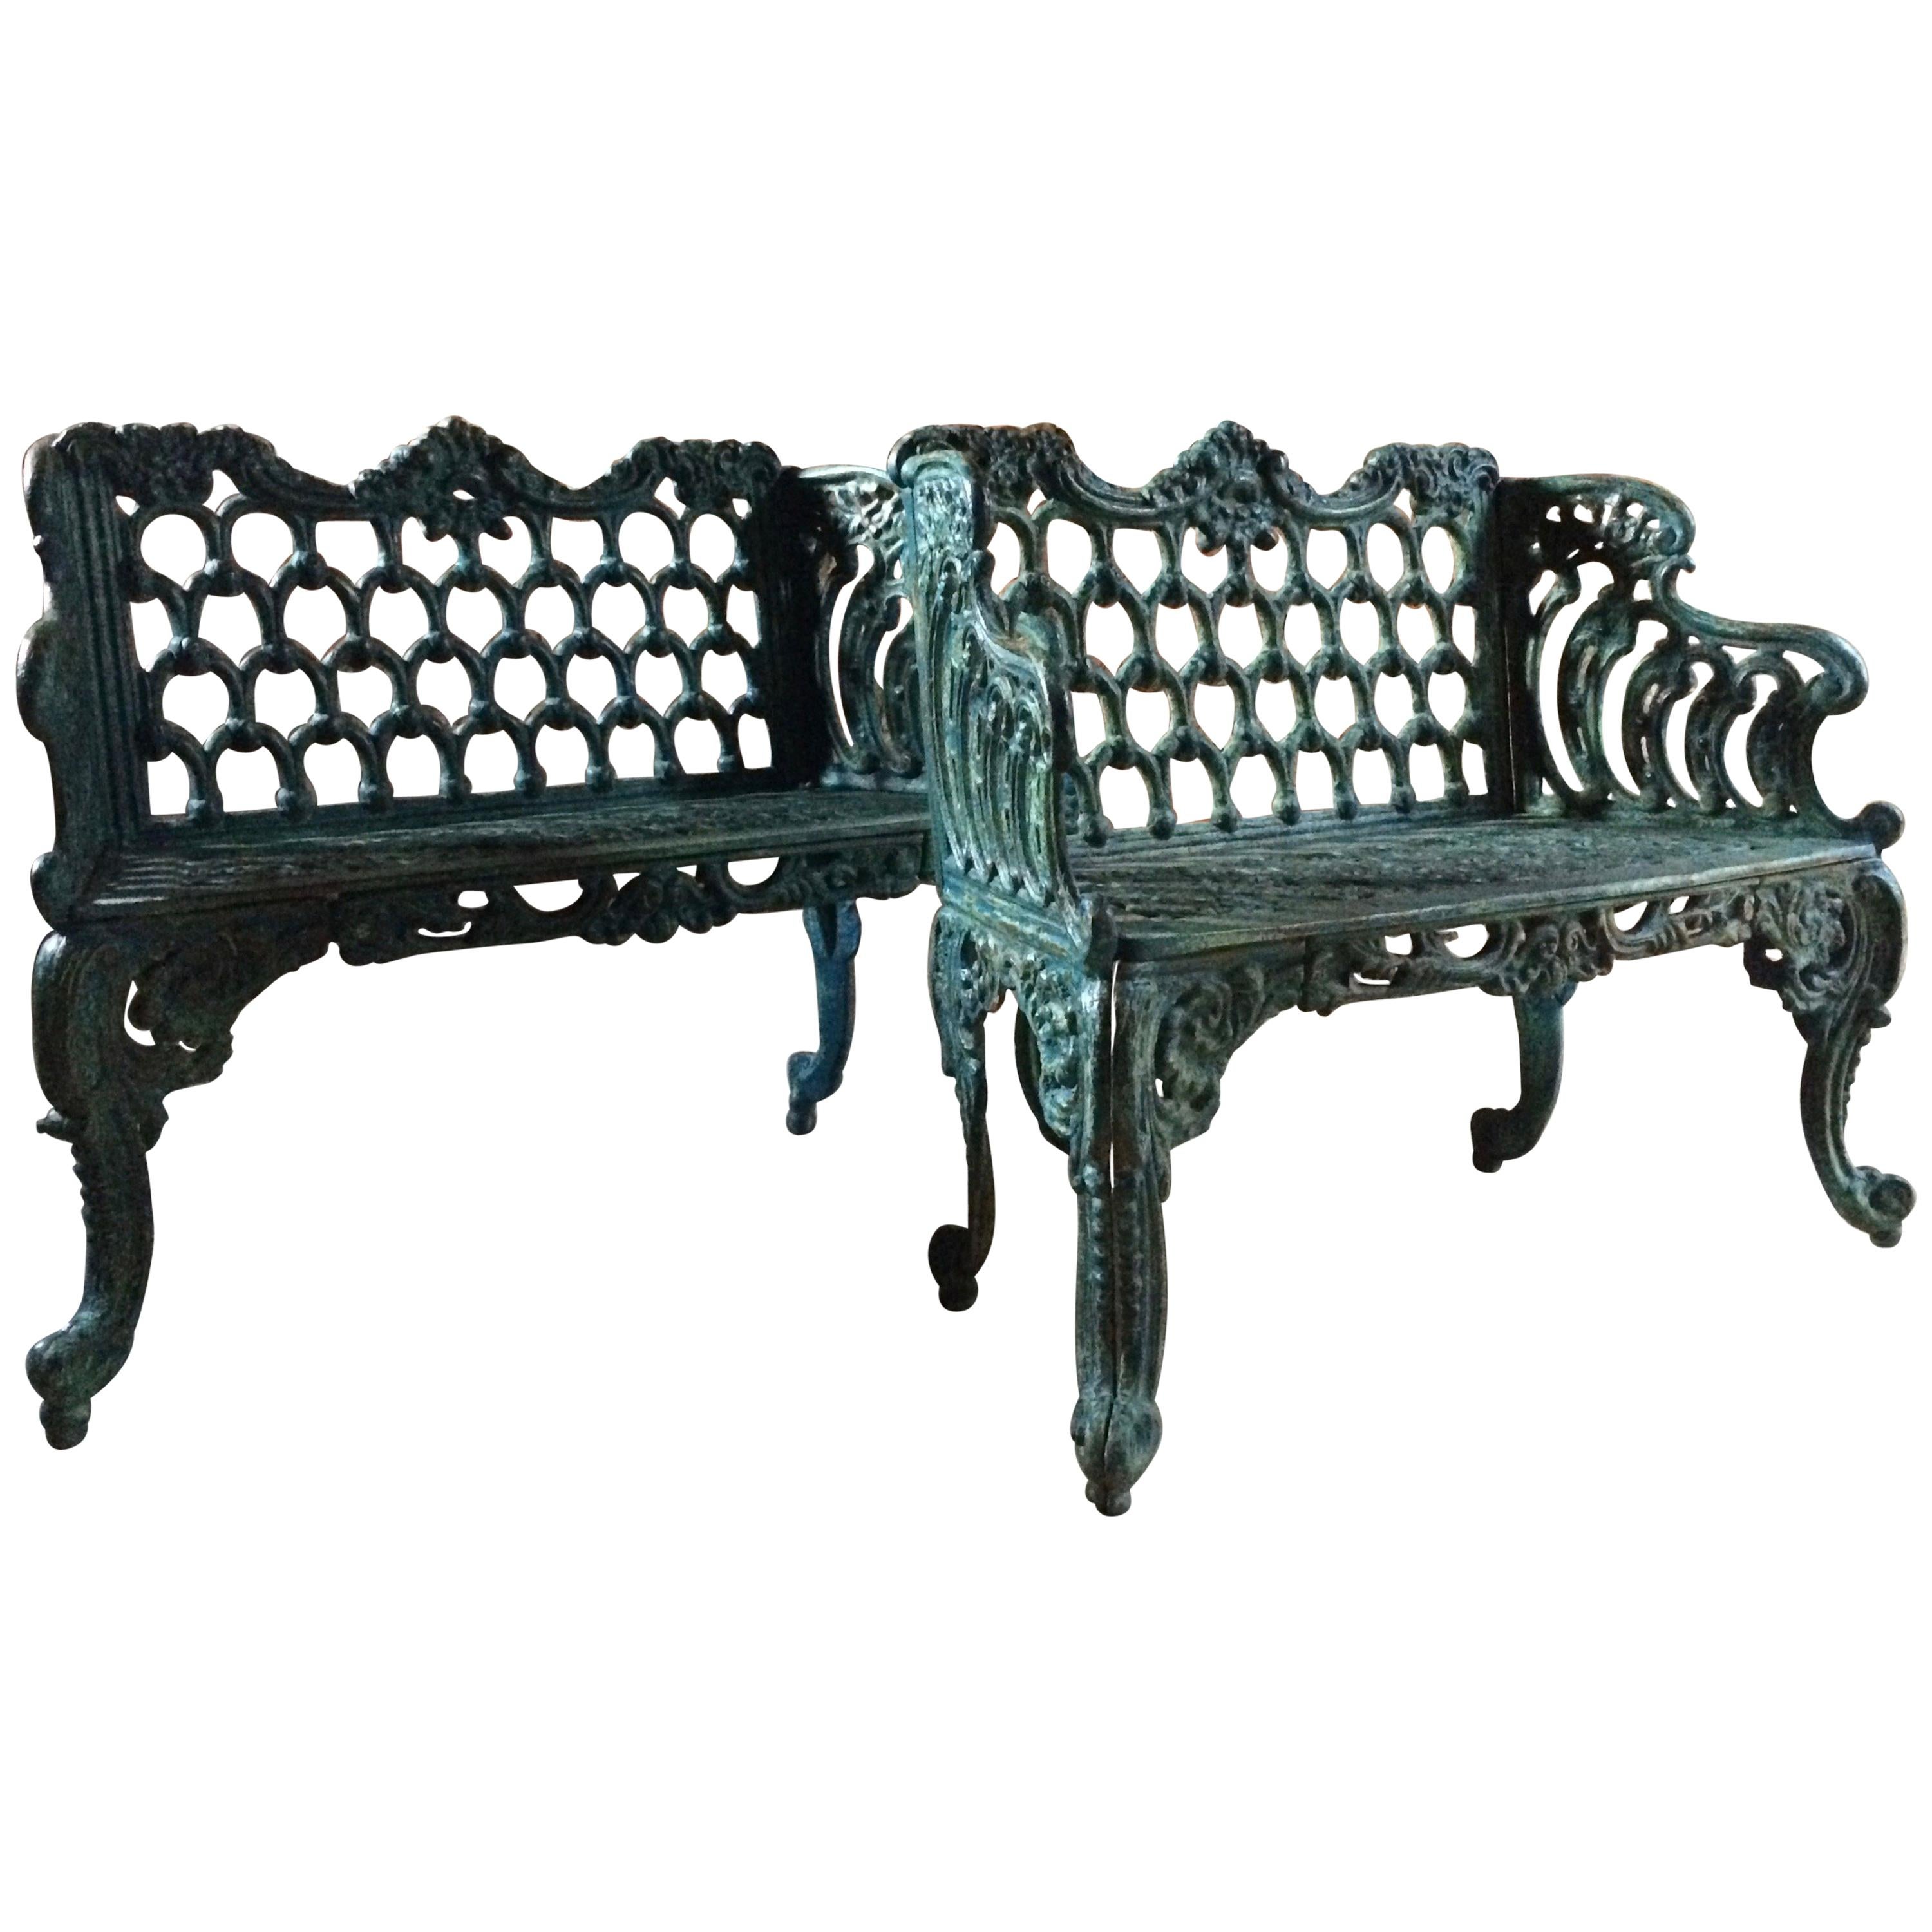 Stunning Pair of Antique Cast Iron Garden Benches Coalbrookdale Style